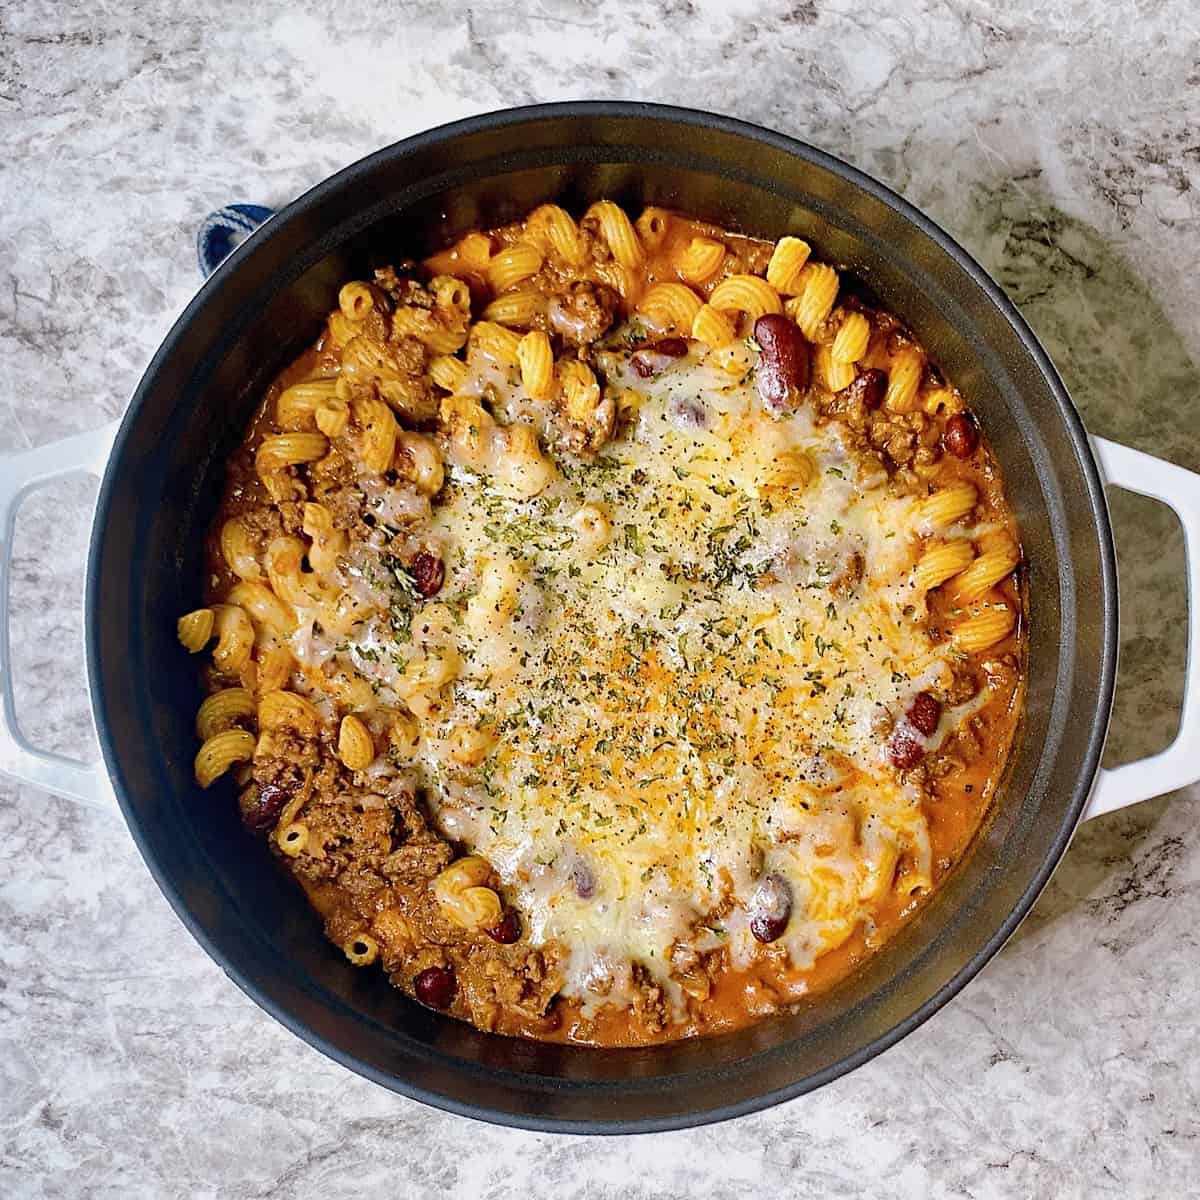 Chili Mac topped with cheese and parsley in Staub pot